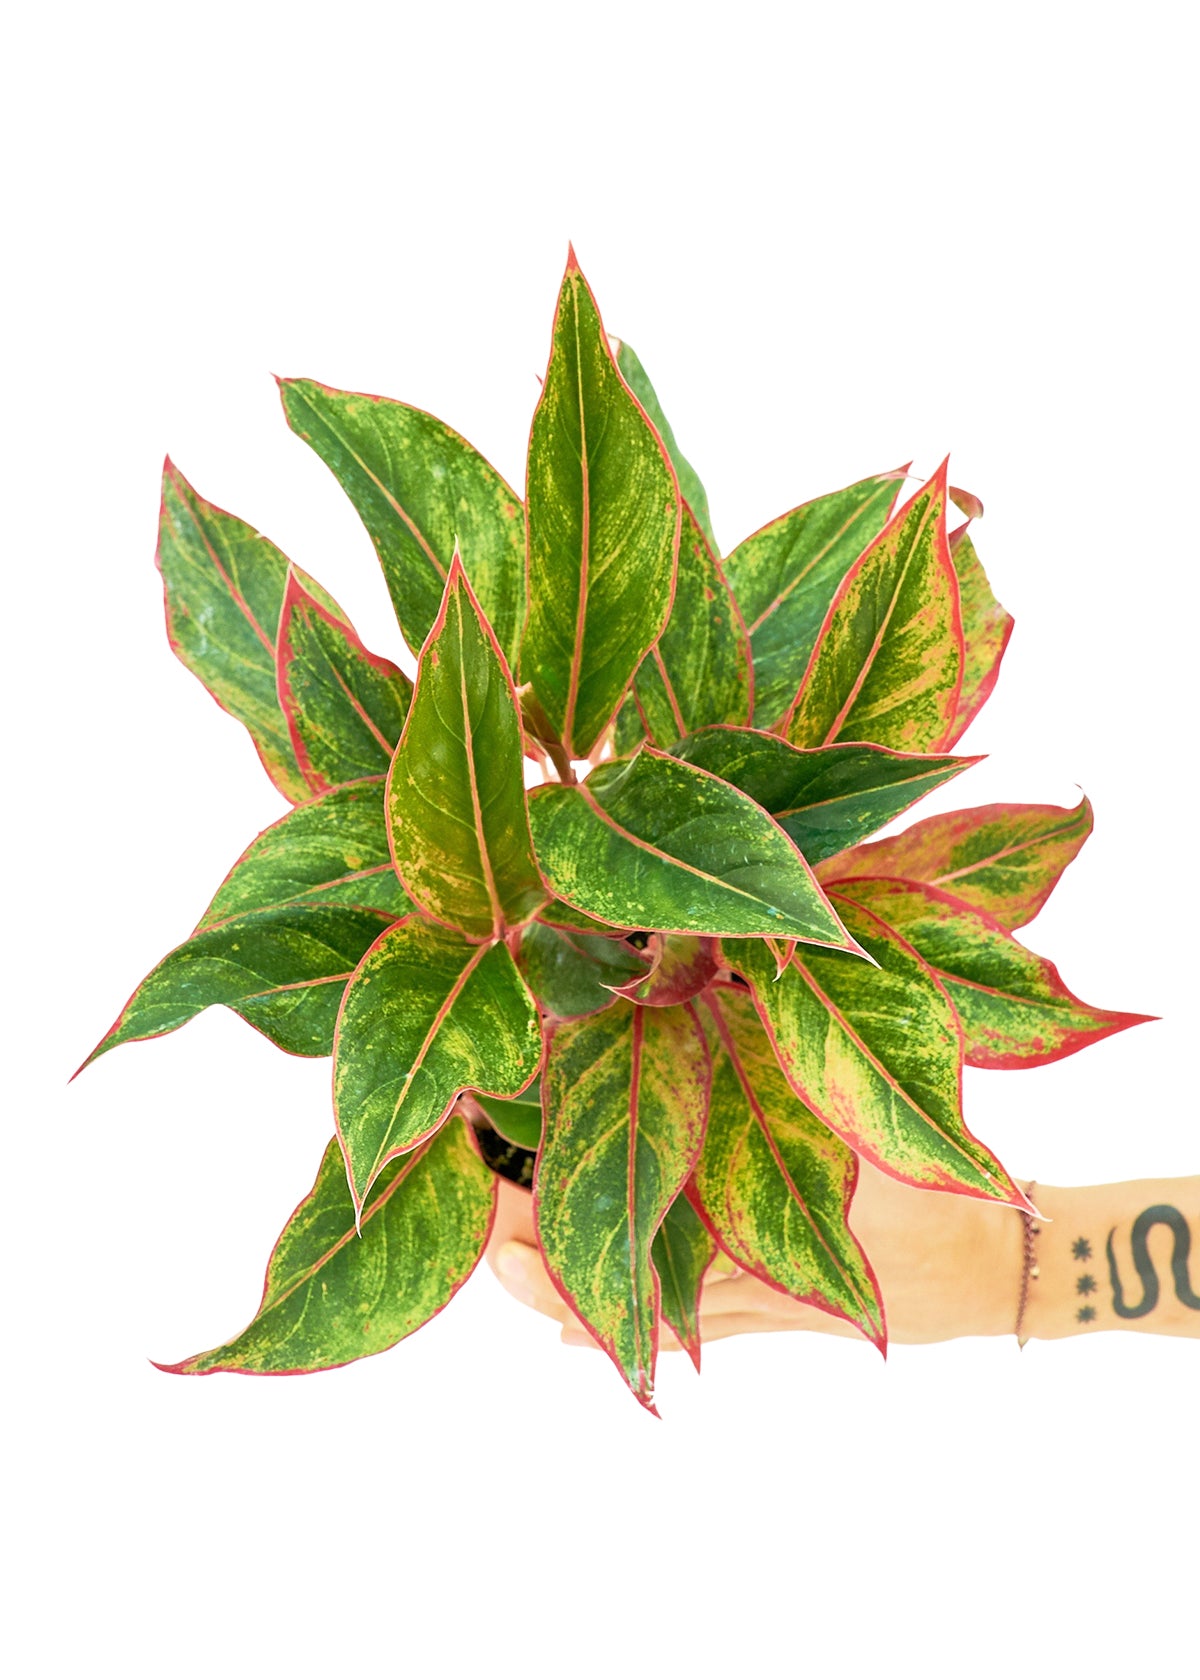 Medium sized Red Chinese Evergreen in a growers pot with a white background with a hand holding the pot to show the top view